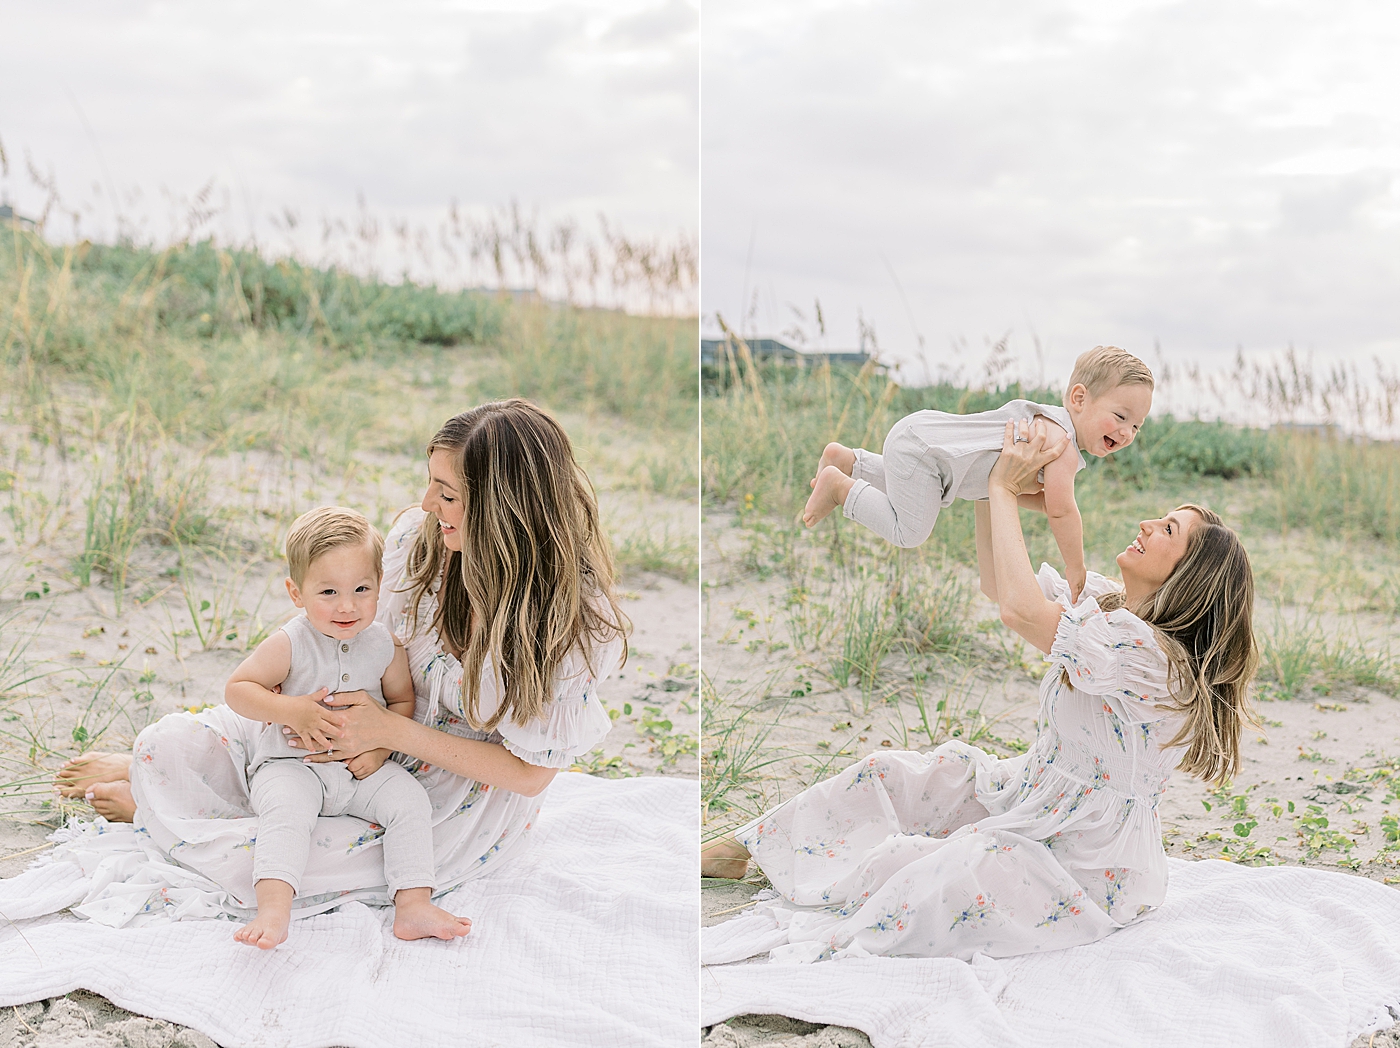 Mom snuggling with her baby boy on the beach | Image by Caitlyn Motycka